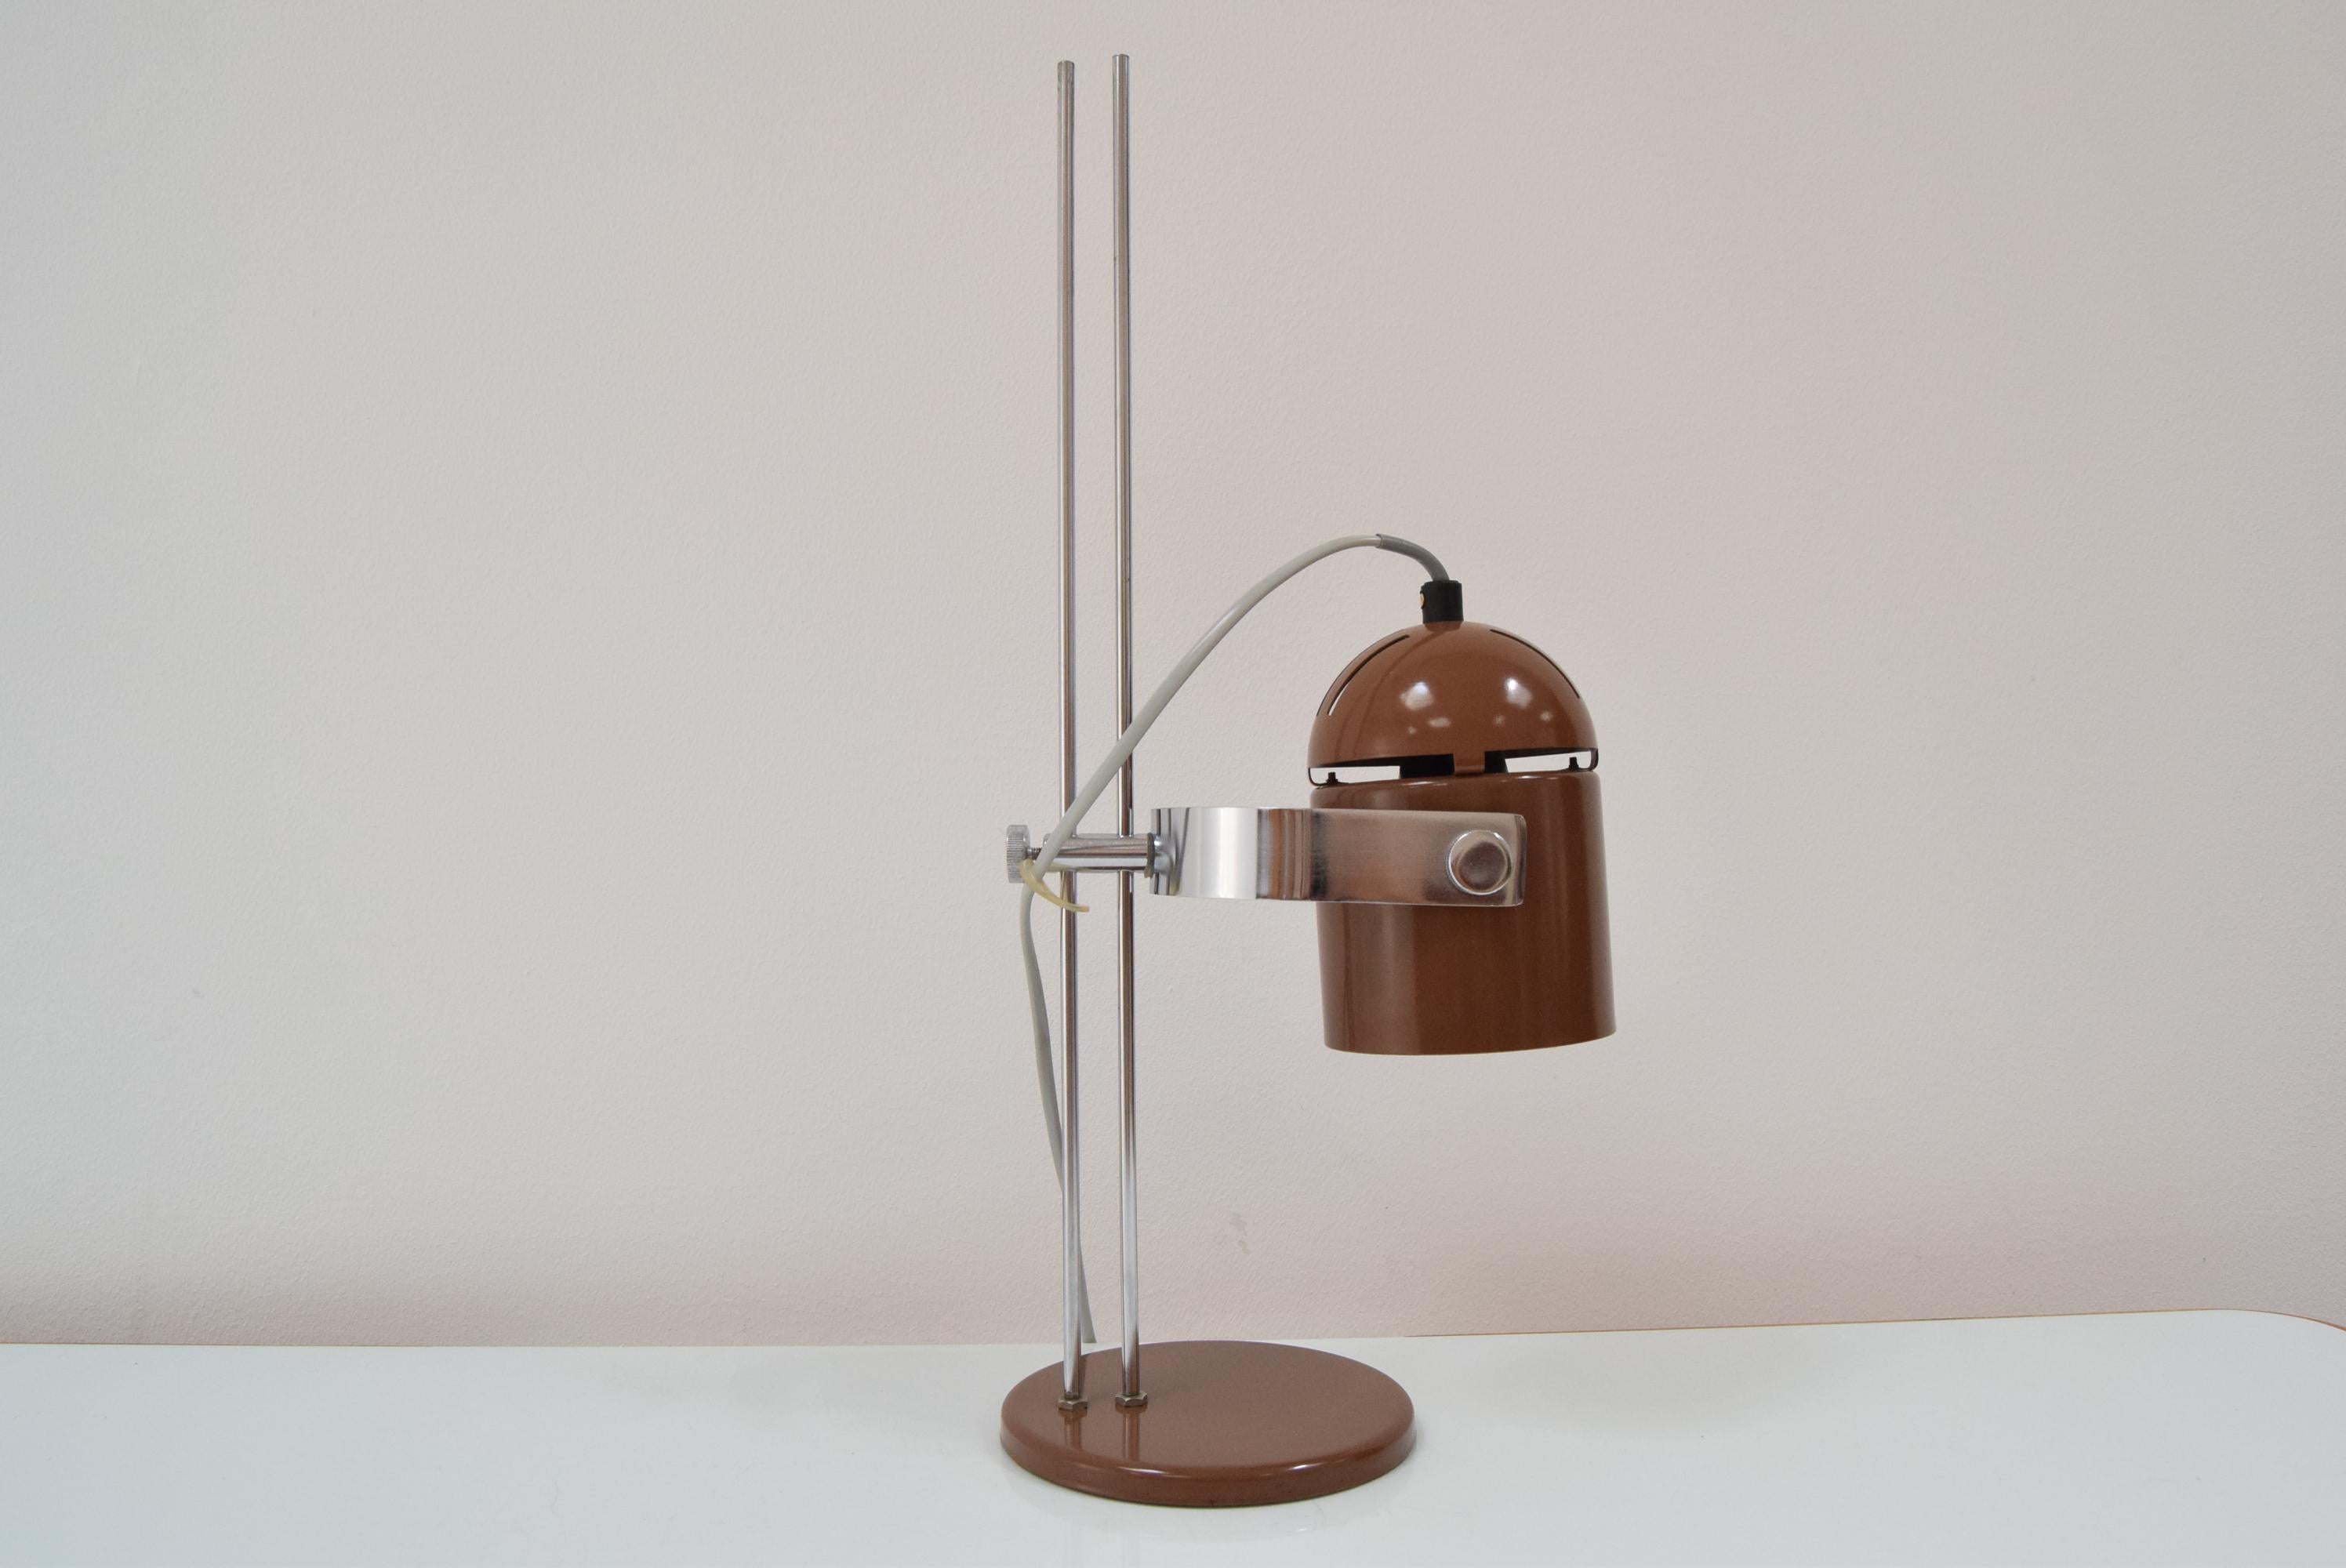 Czech Mid-century Adjustable table Lamp by Stanislav Indra for Combi Lux, 1970's.  For Sale